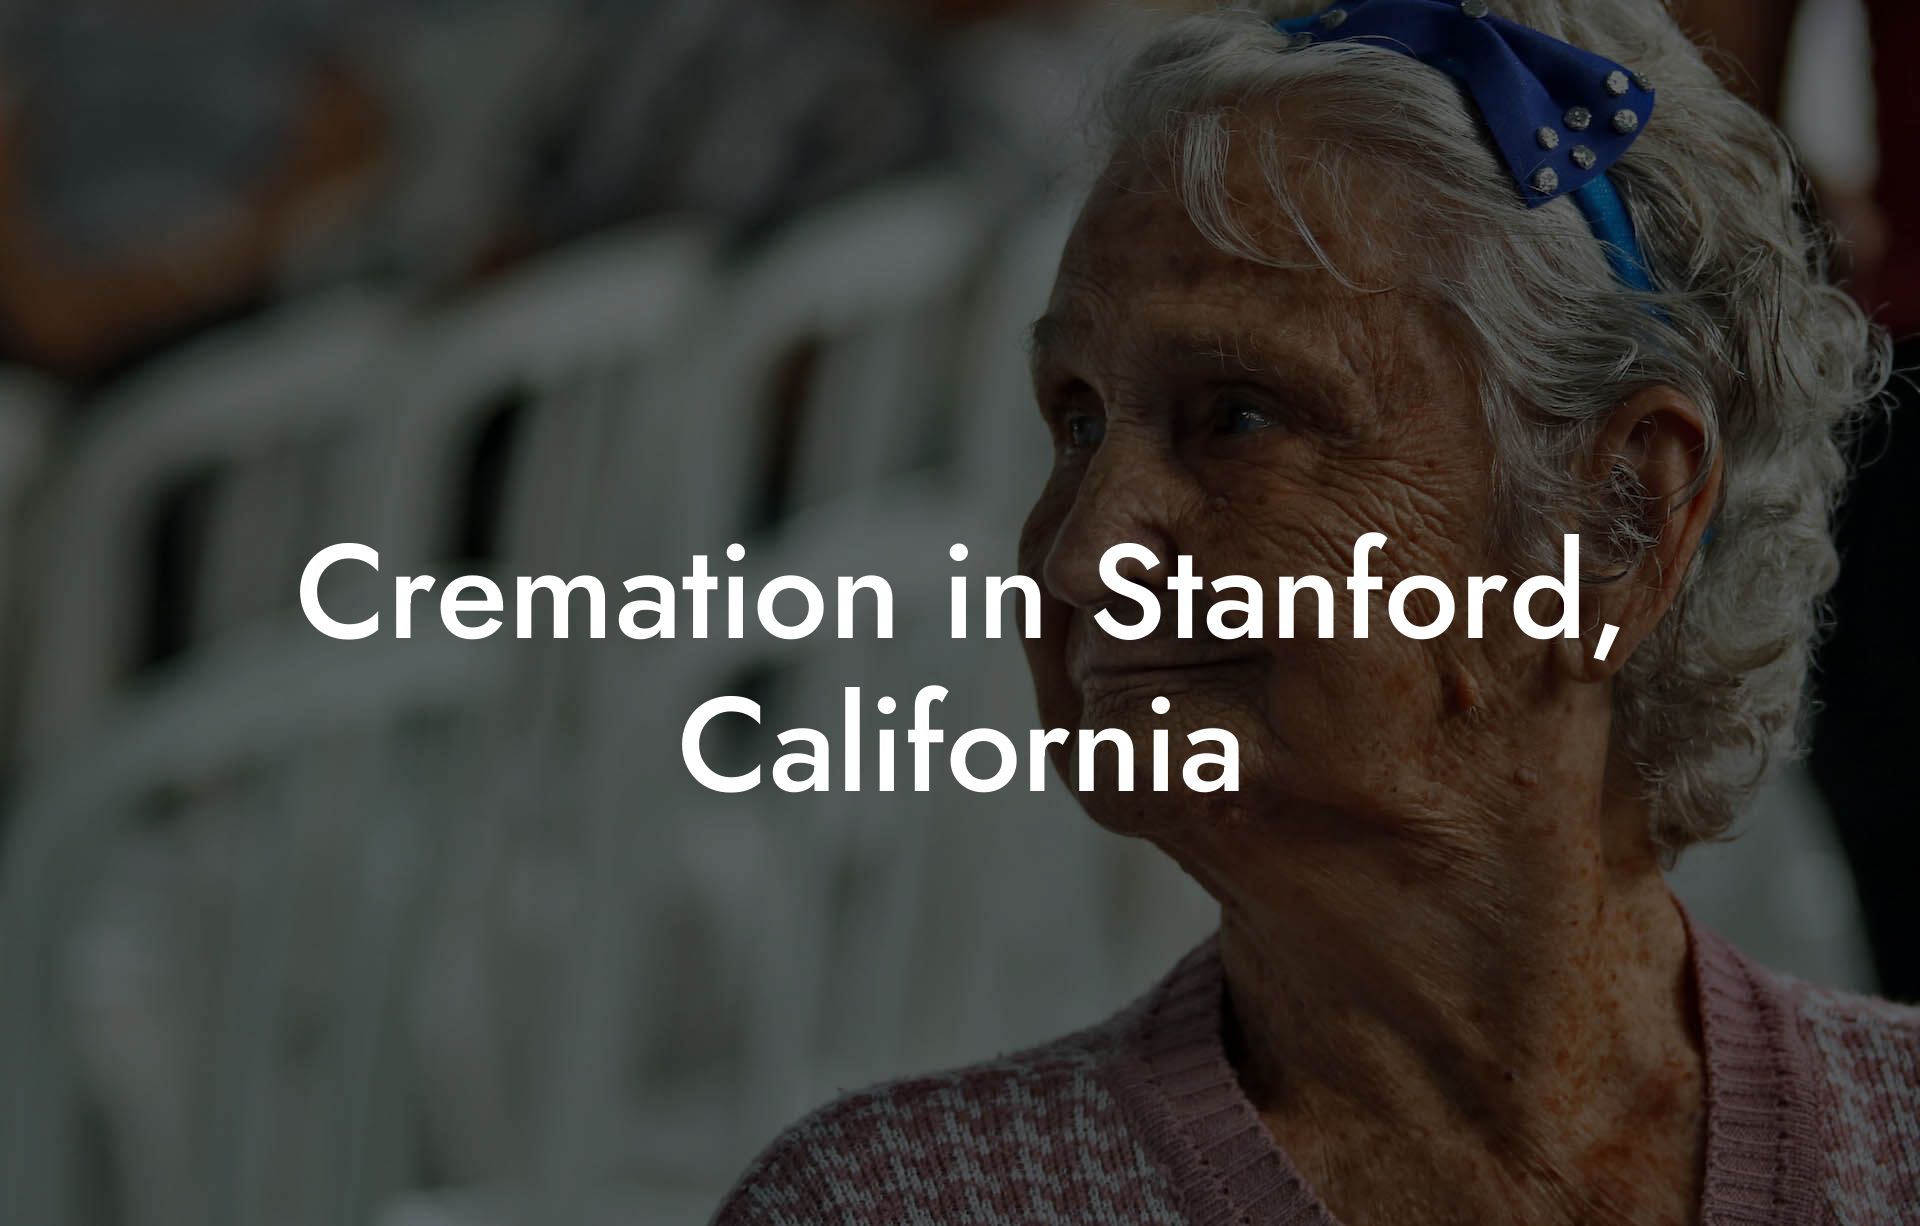 Cremation in Stanford, California